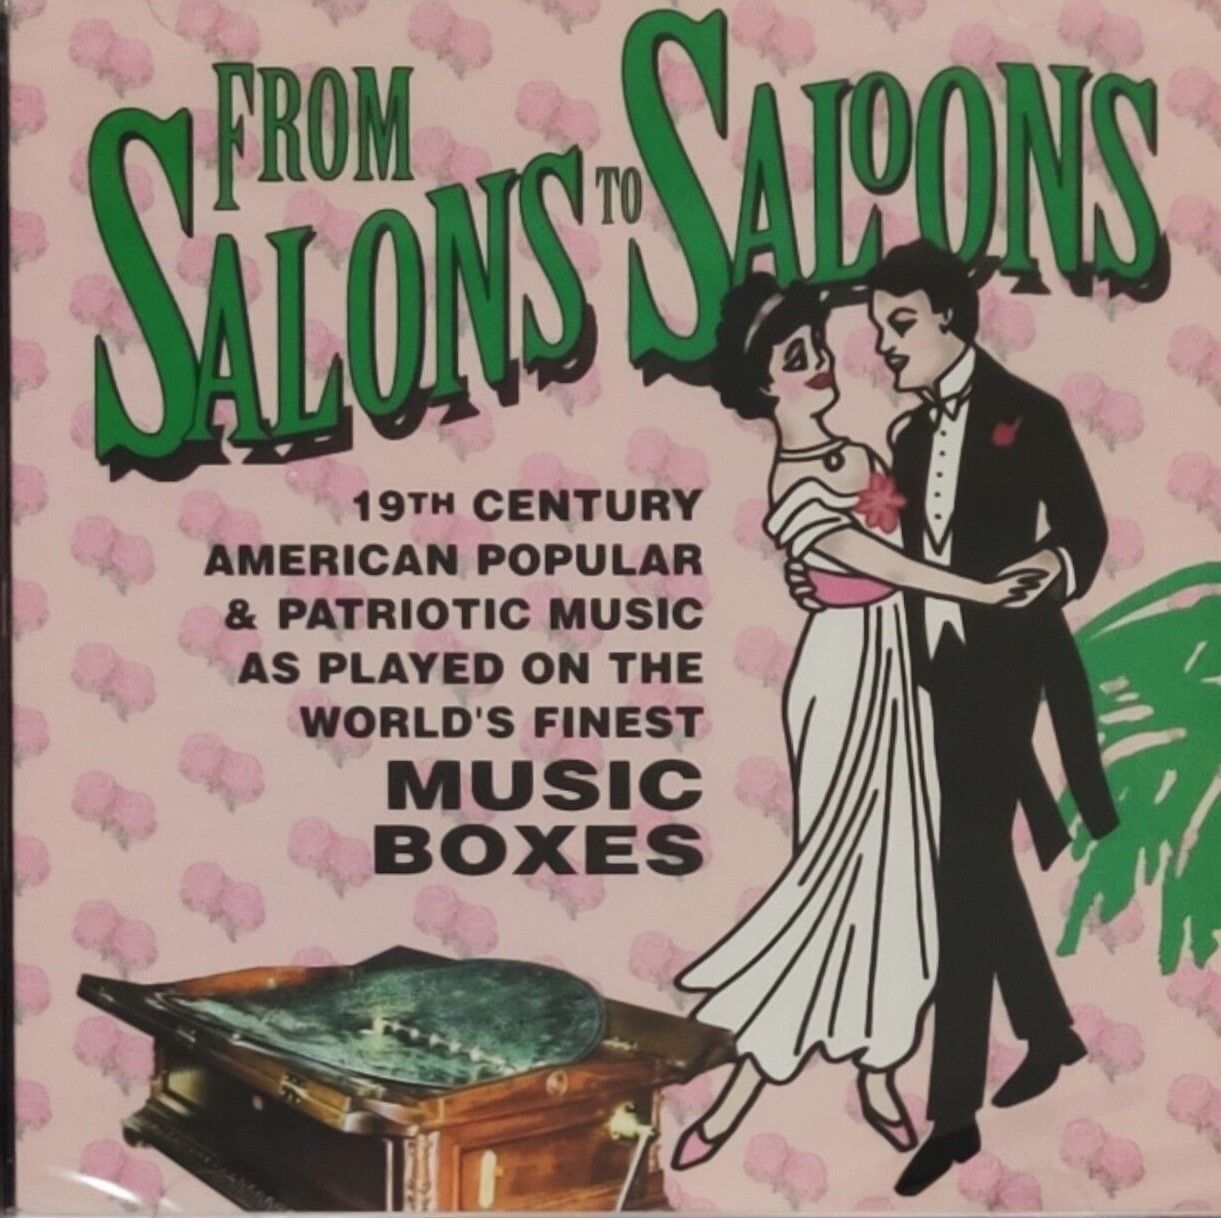 New From Salons to Saloons Vintage Music Box Music 19th Century American Sealed